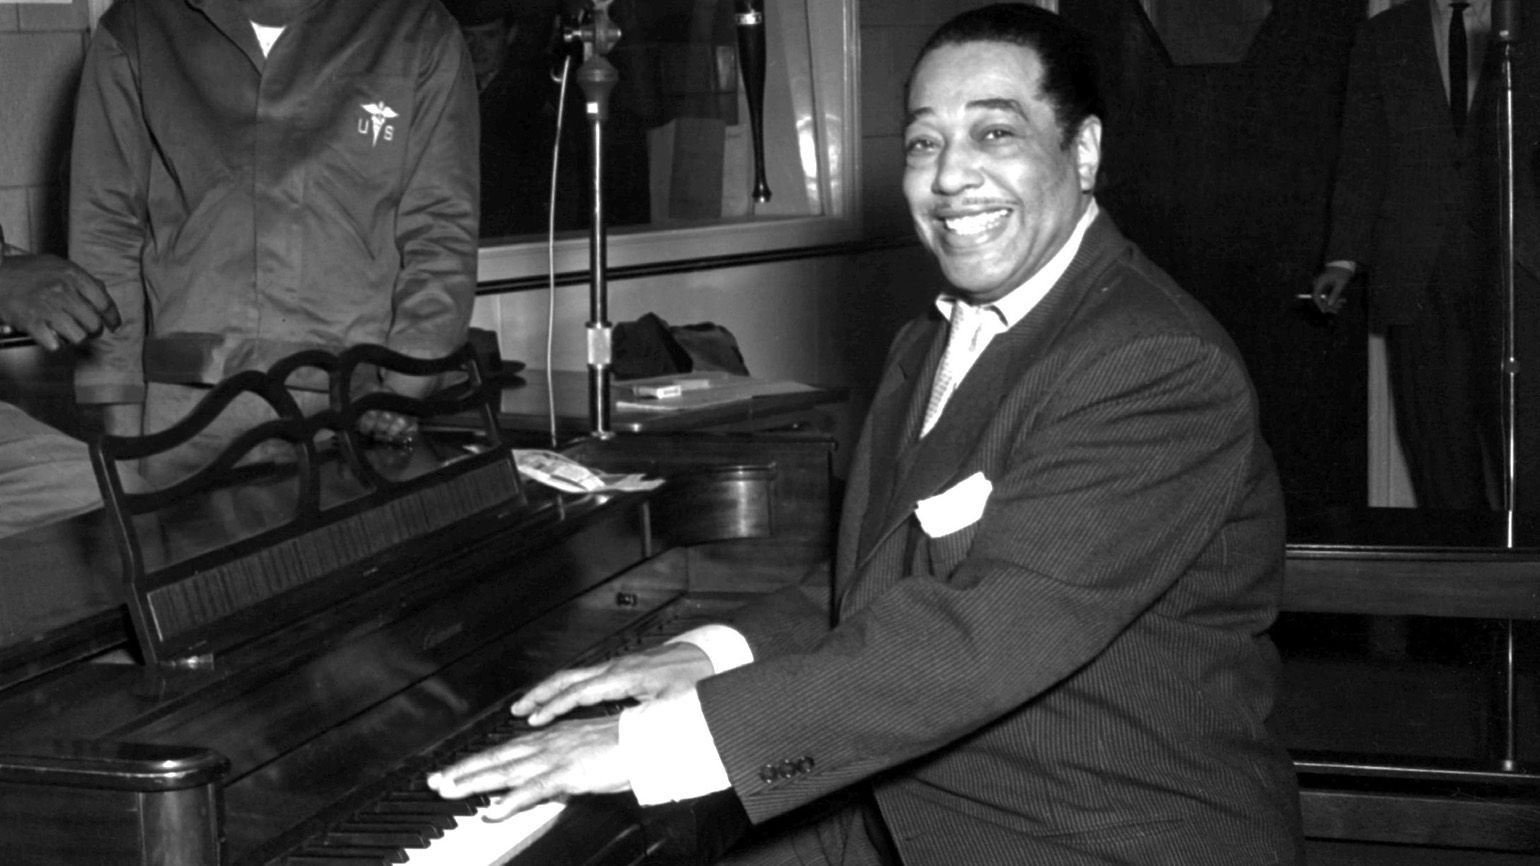 Duke Ellington sits at a piano as an inspiring figure for Black History Month